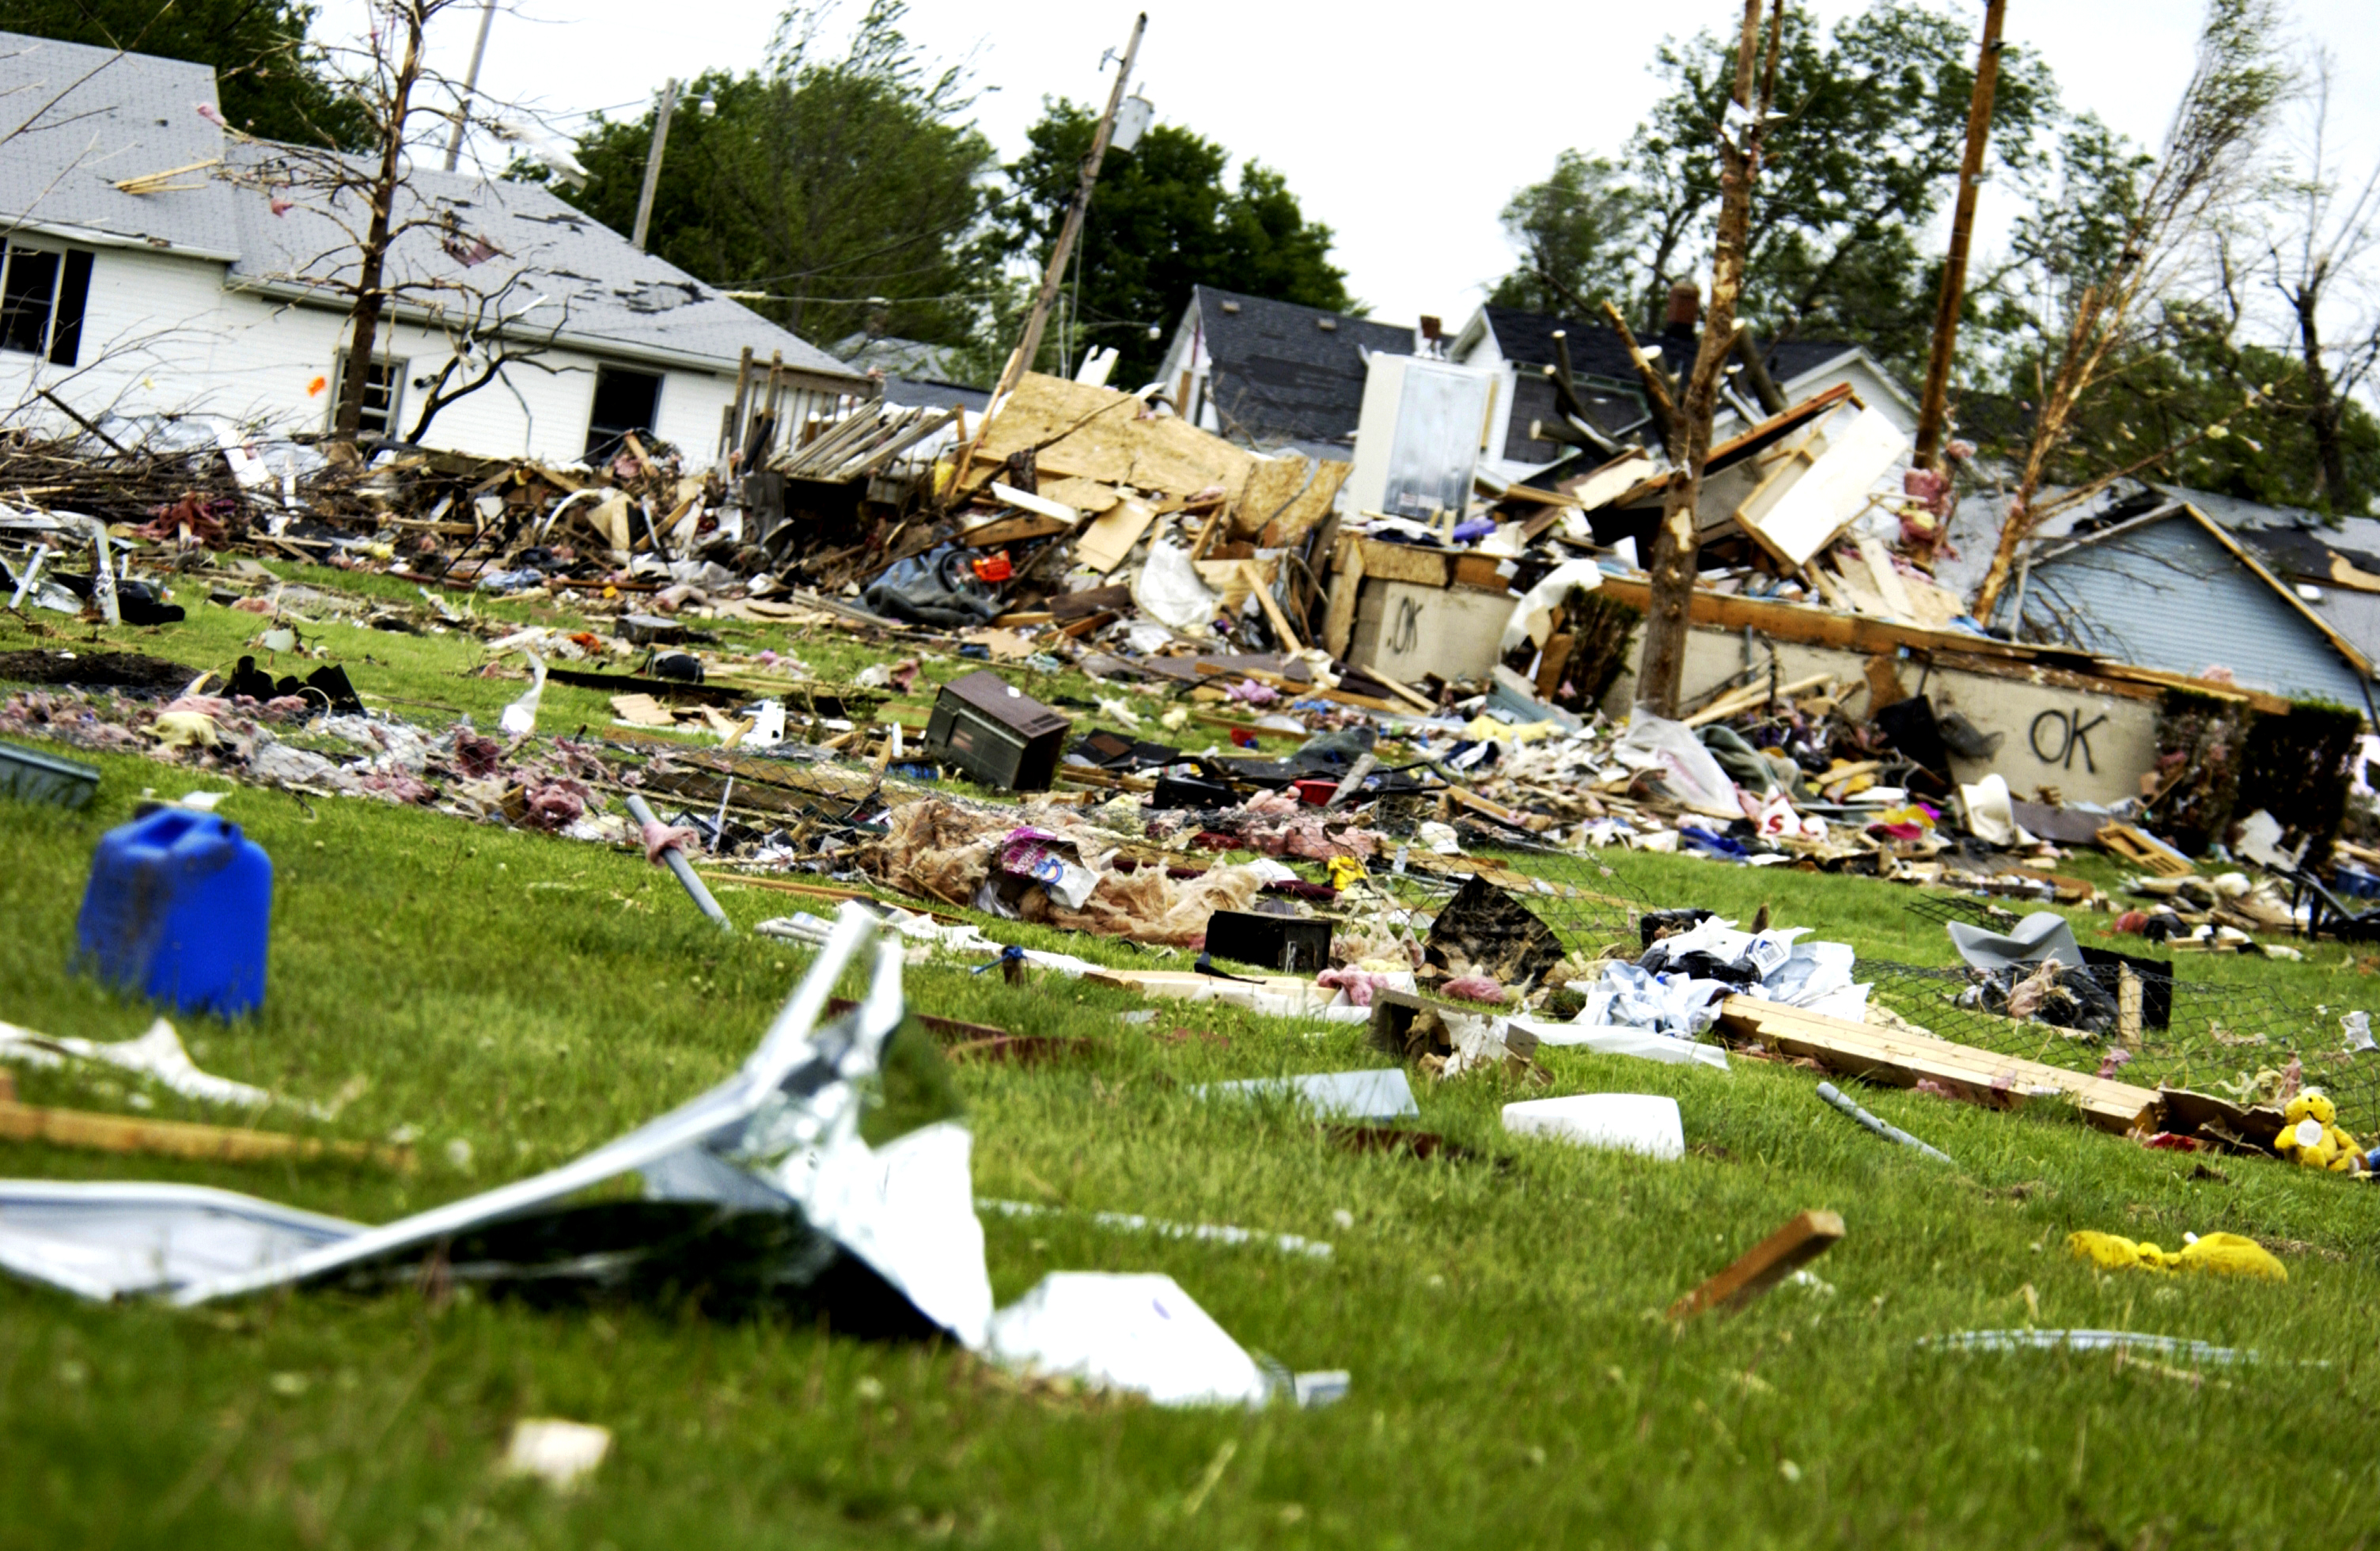 Aftermath of severe storm on a neighborhood with damaged houses and strewn debris.